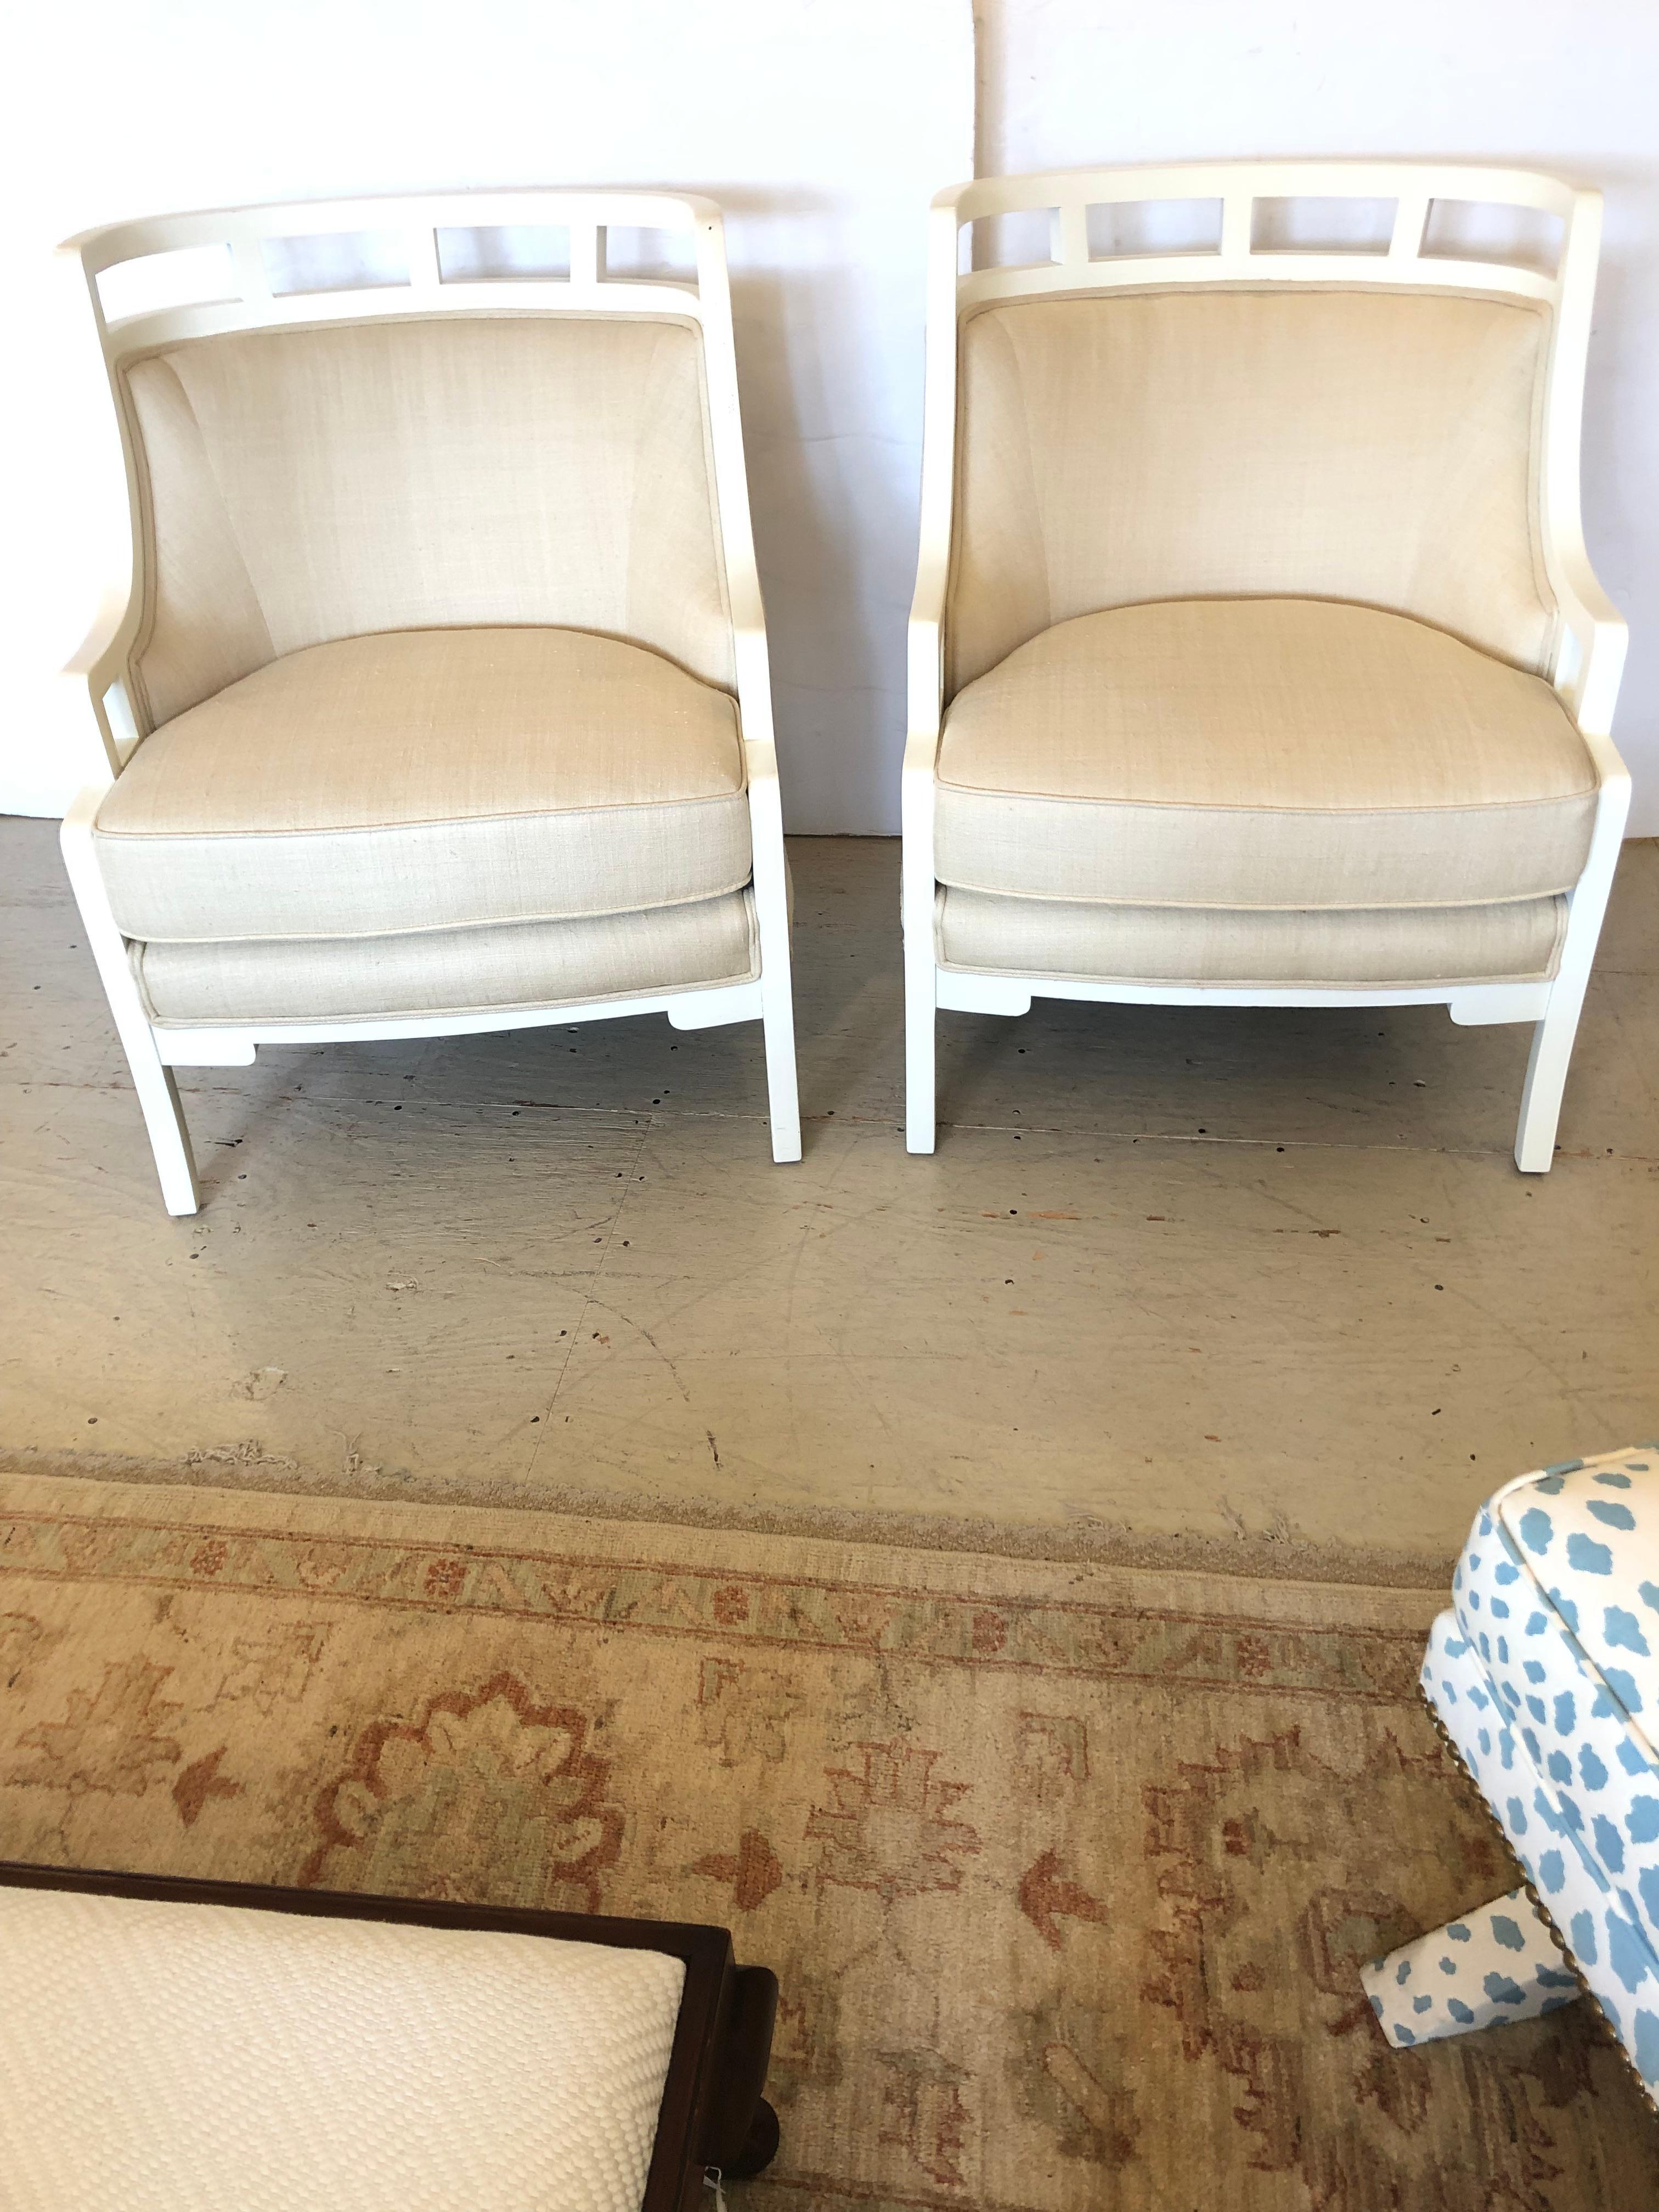 Chic pair of curved barrel back Hollywood Regency club chairs, newly transformed with white paint and natural linen upholstery.